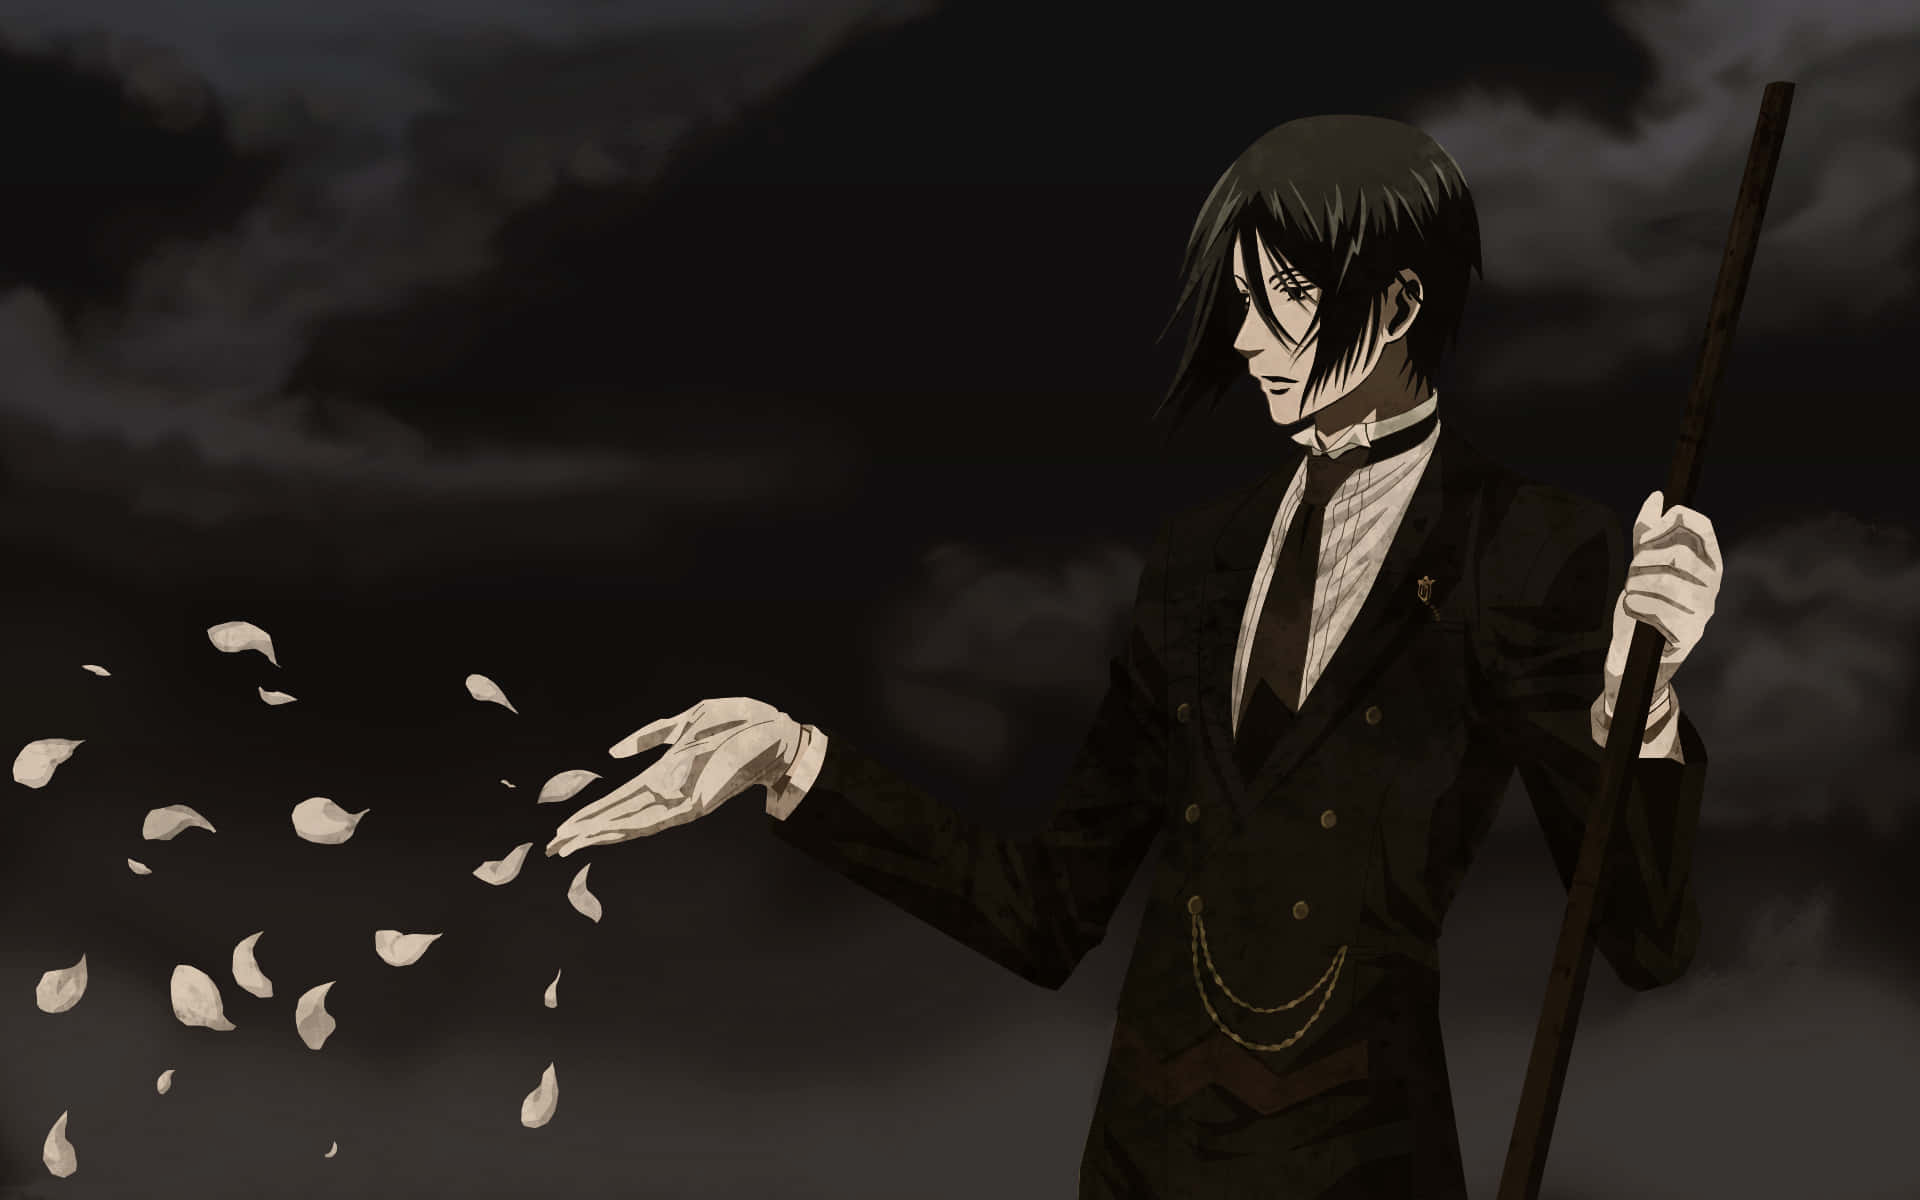 Step into a world of mystery and supernatural powers with Black Butler